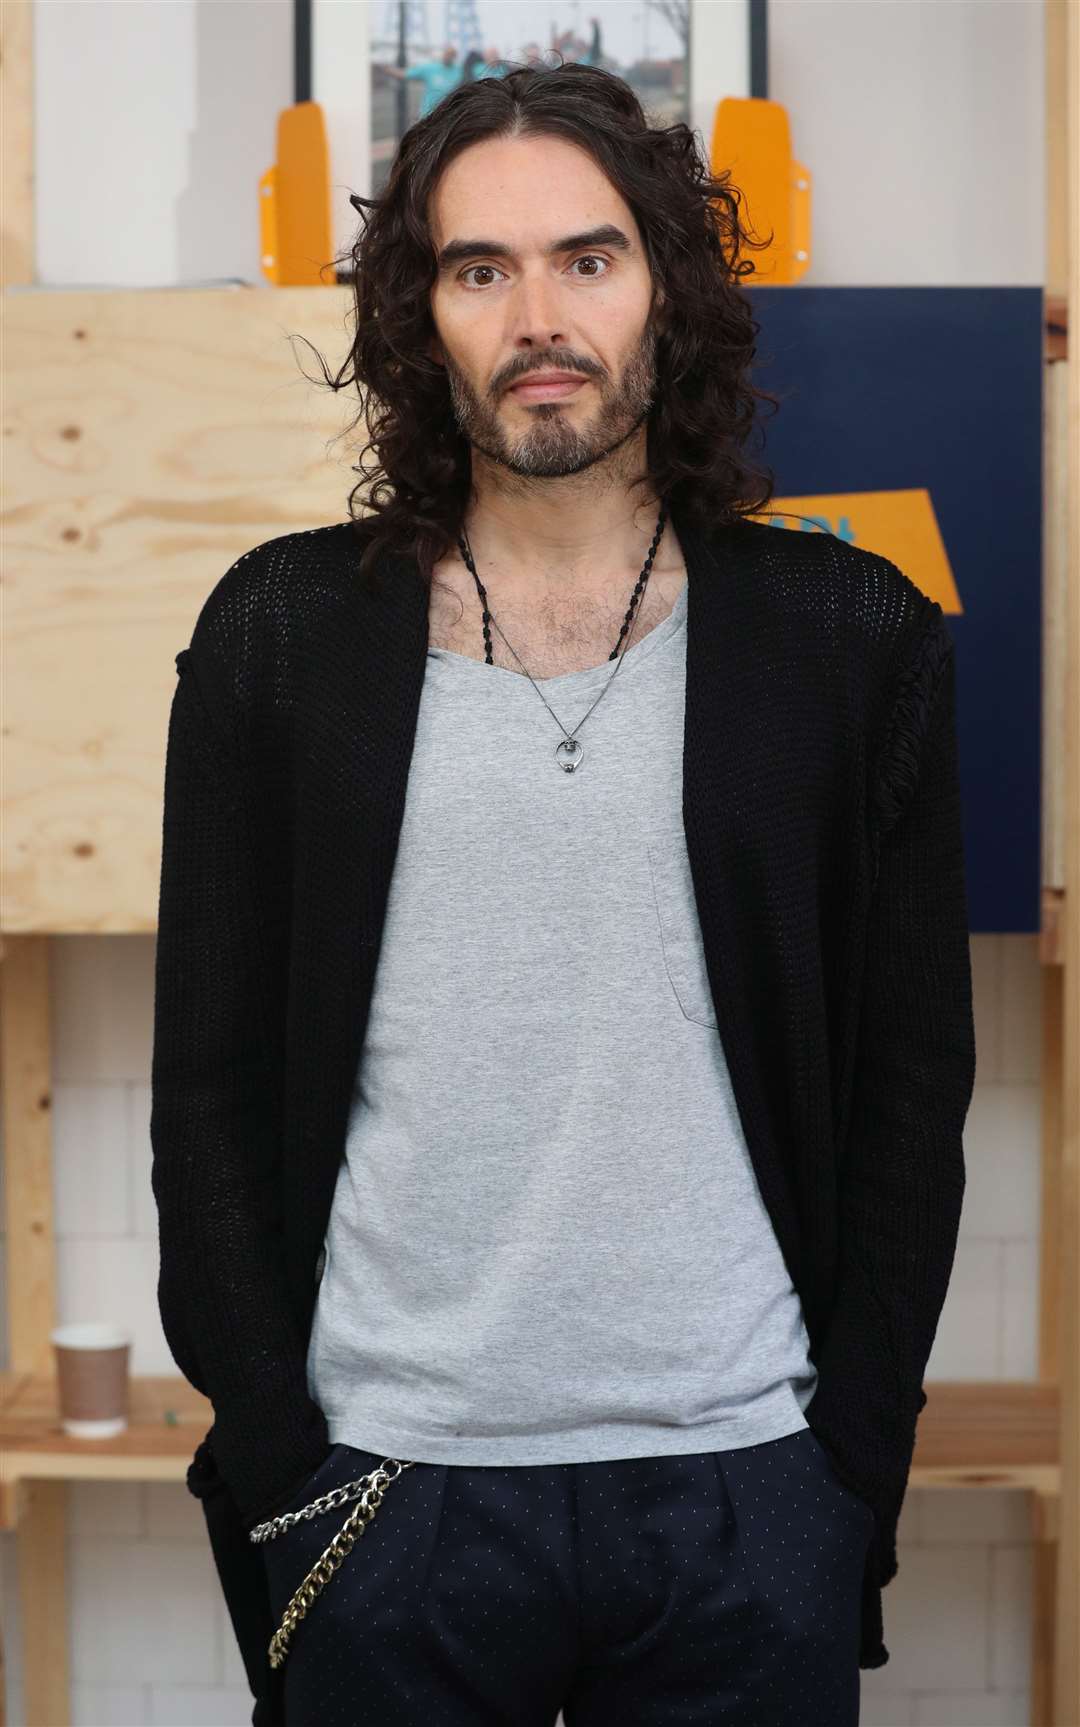 Russell Brand has ‘absolutely’ denied criminal allegations (Jonathan Brady/PA)